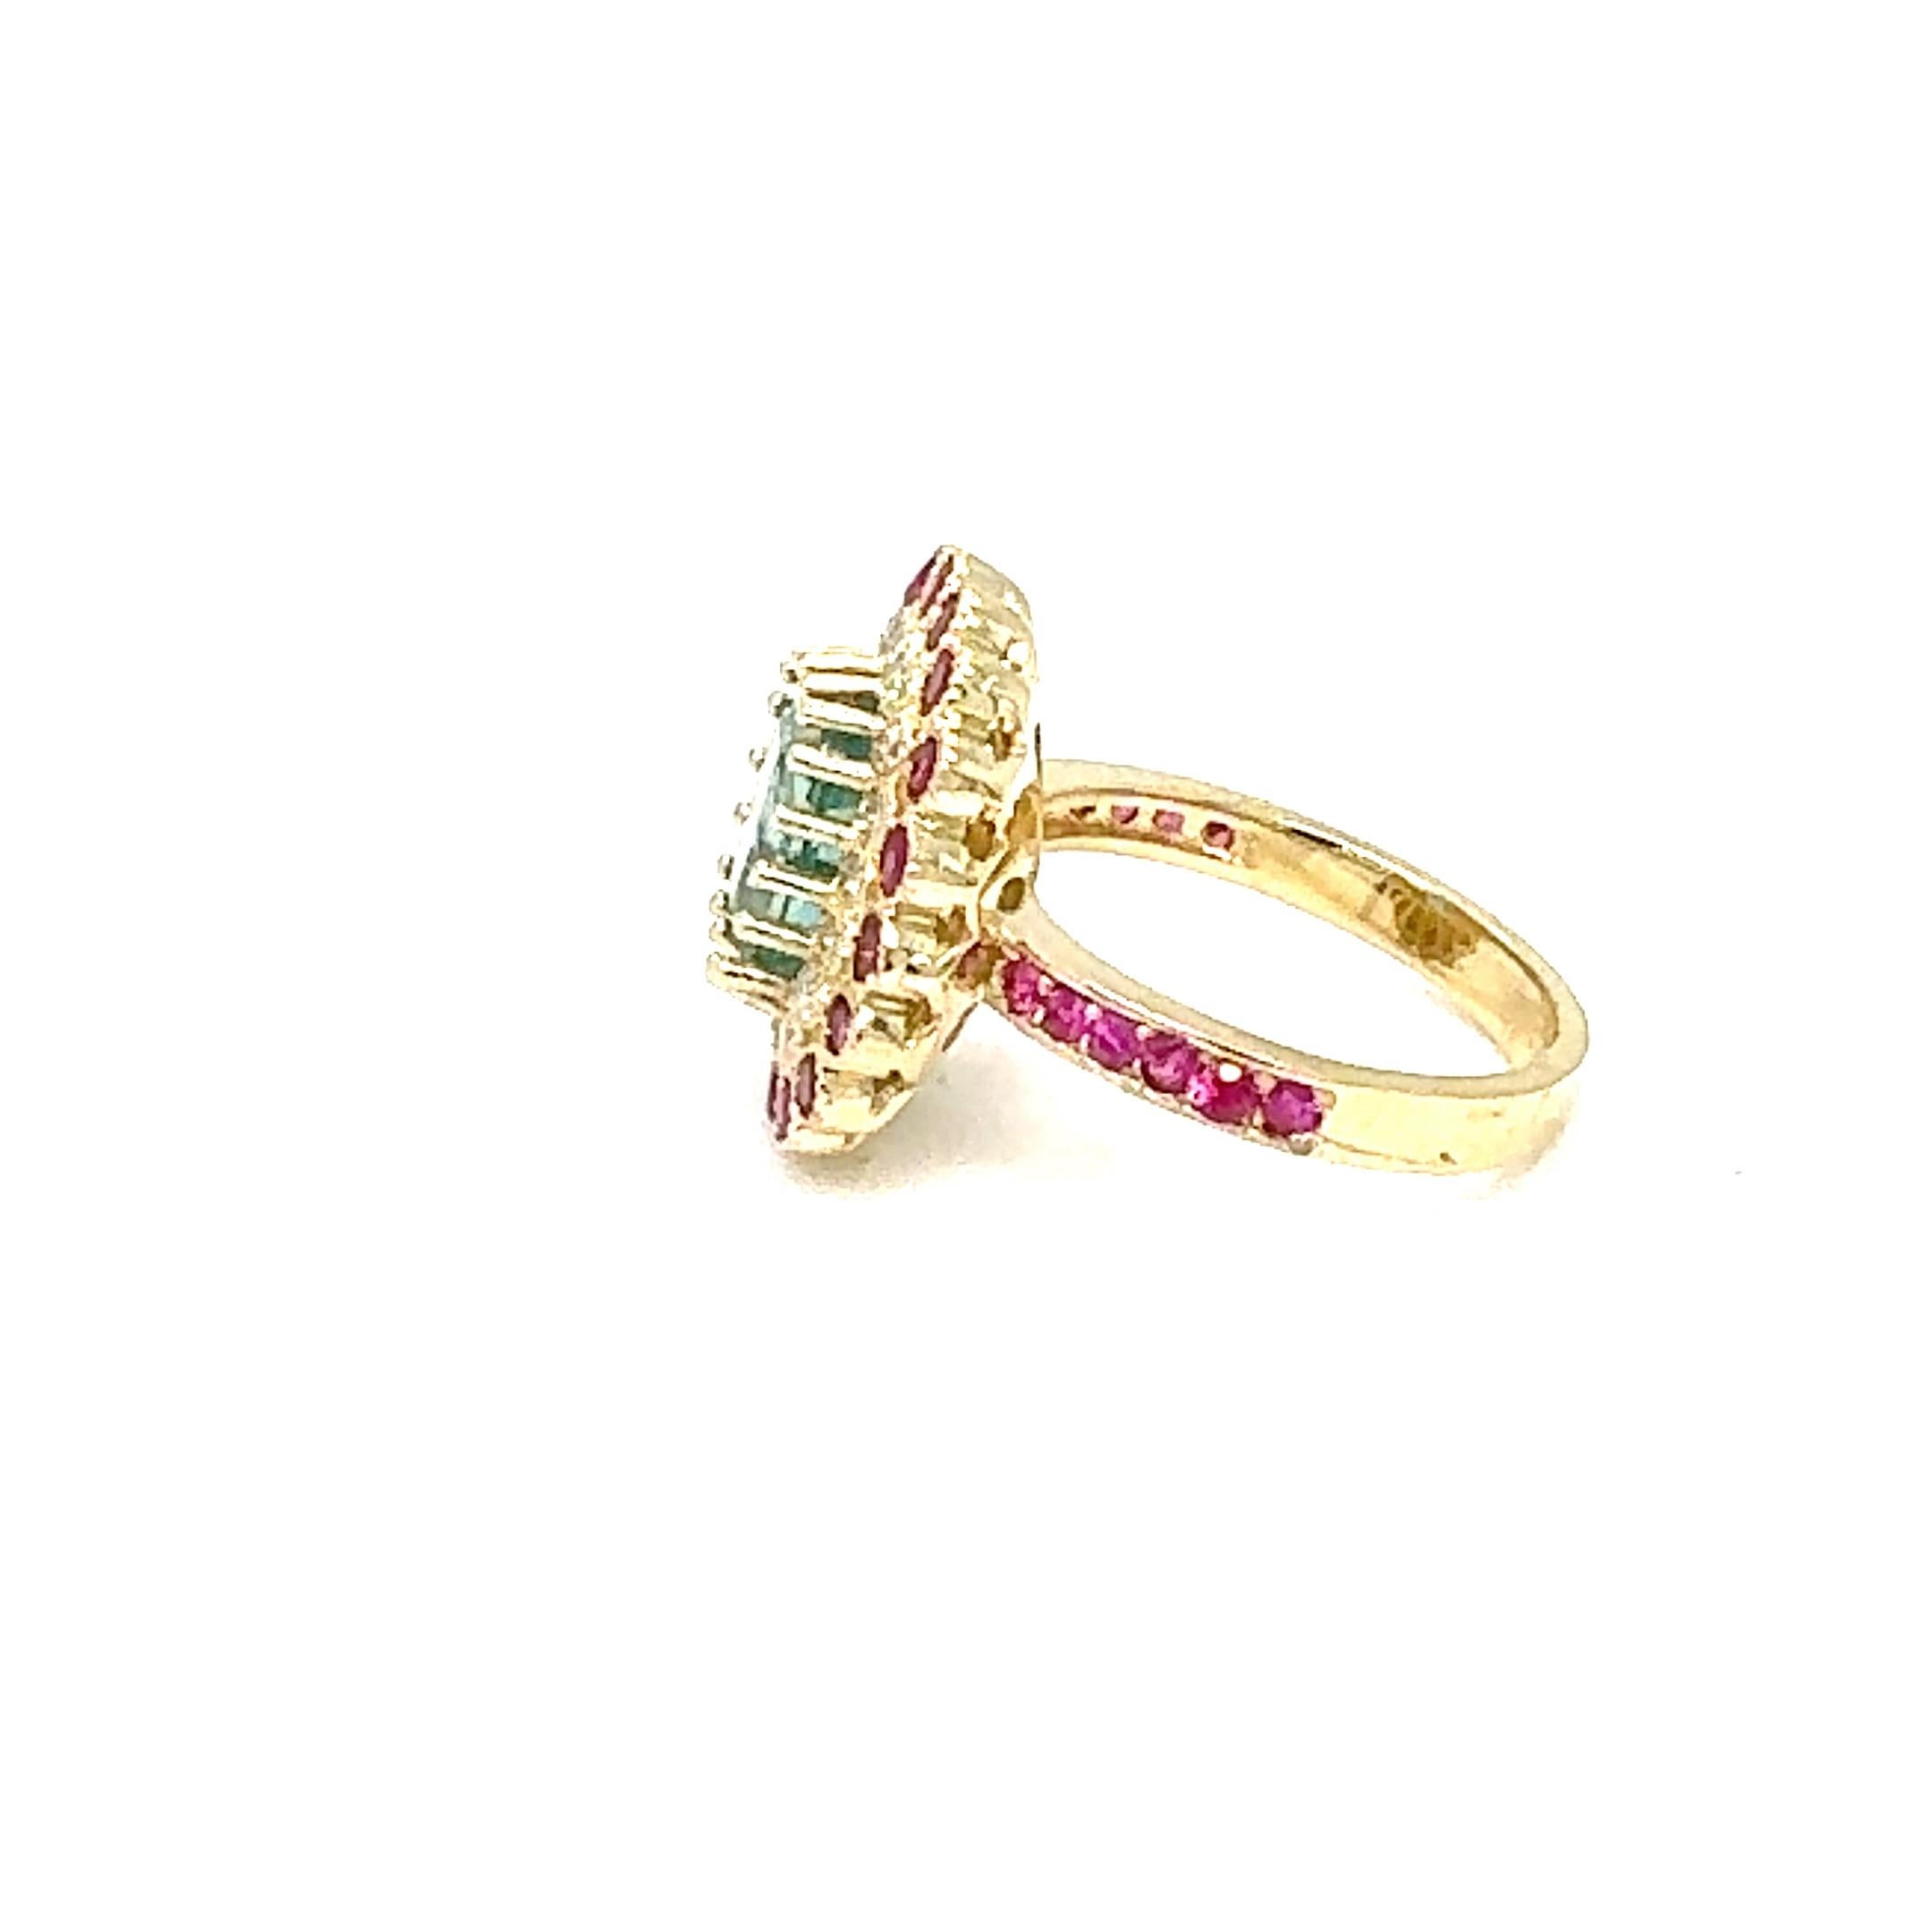 Contemporary 4.61 Carat Apatite Pink Sapphire Diamond Yellow Gold Cocktail Ring For Sale